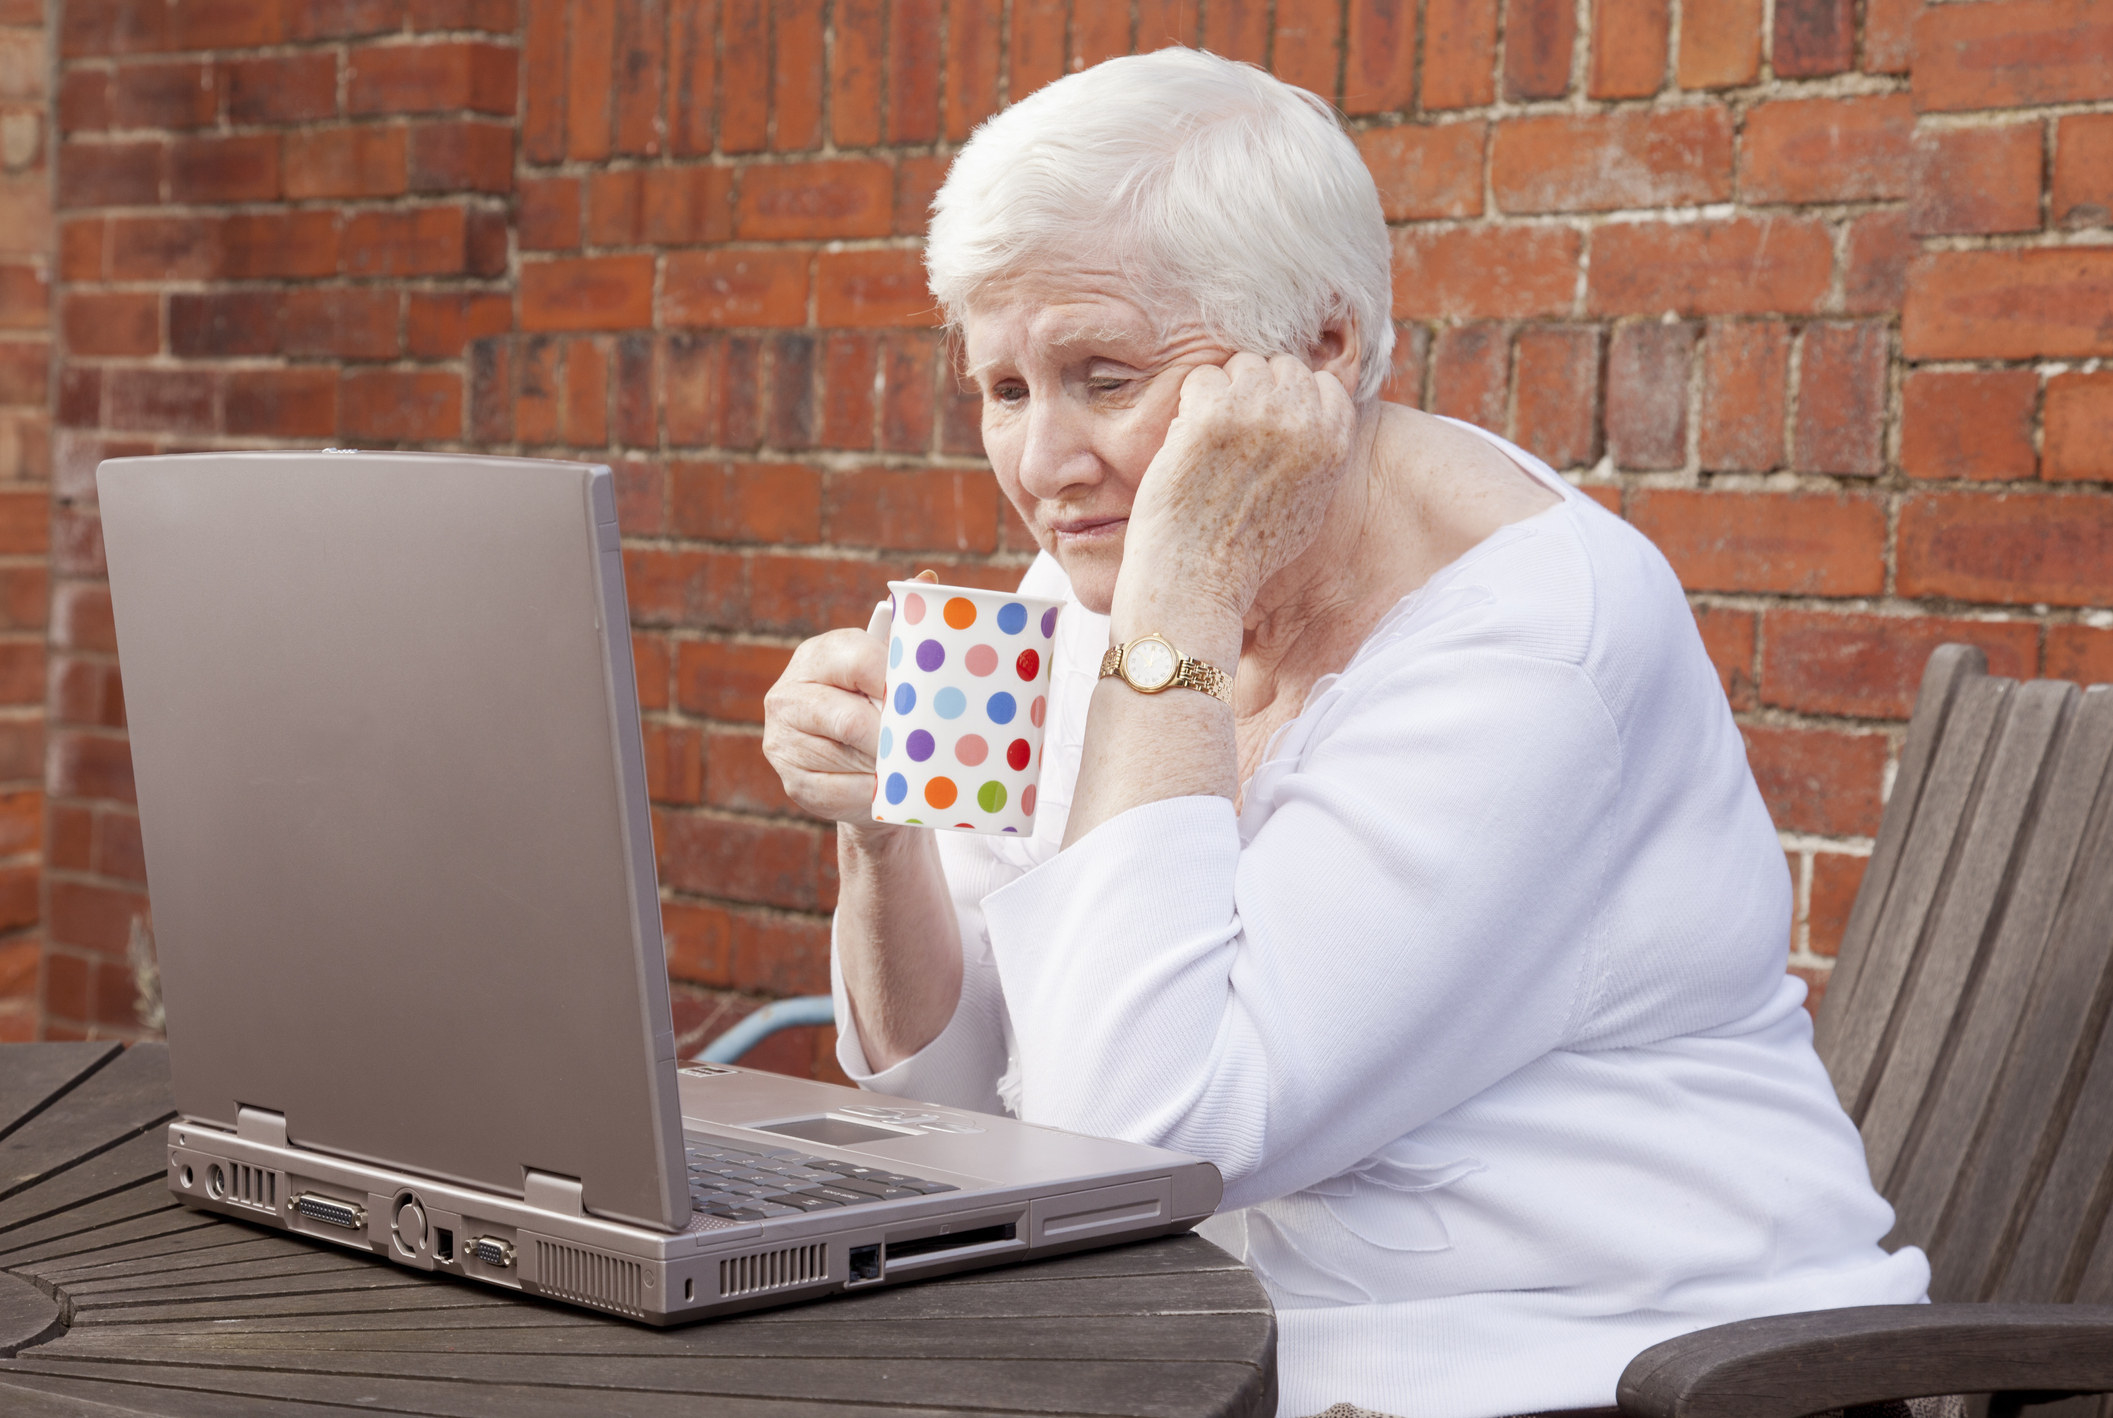 A woman sips from a mug as she looks at a laptop